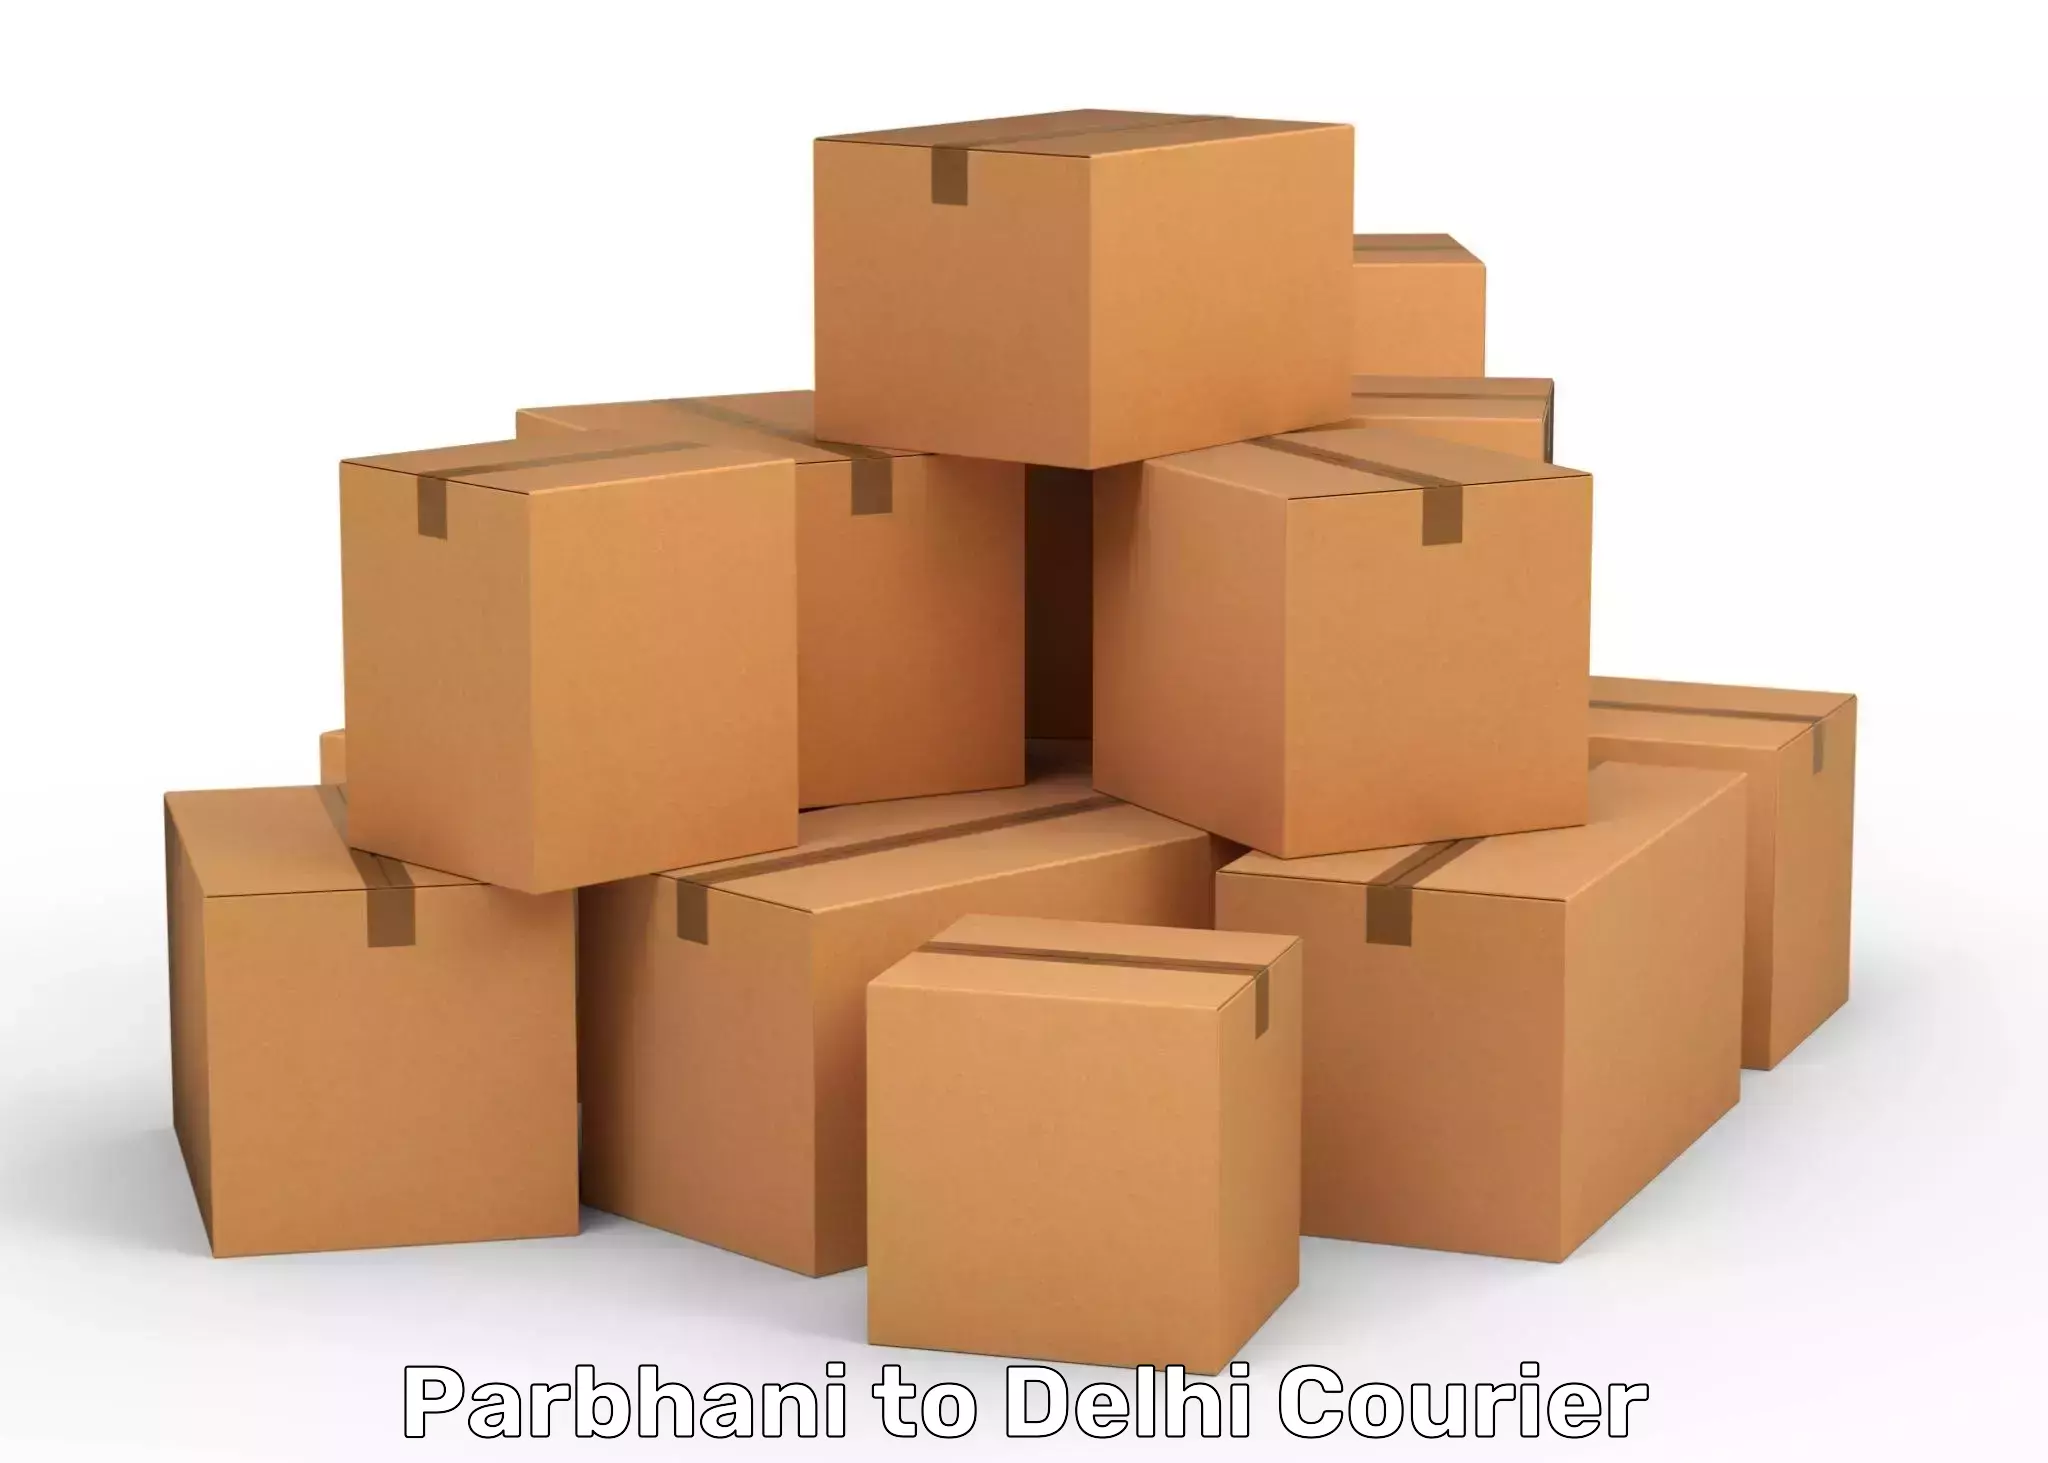 High-capacity shipping options Parbhani to NCR